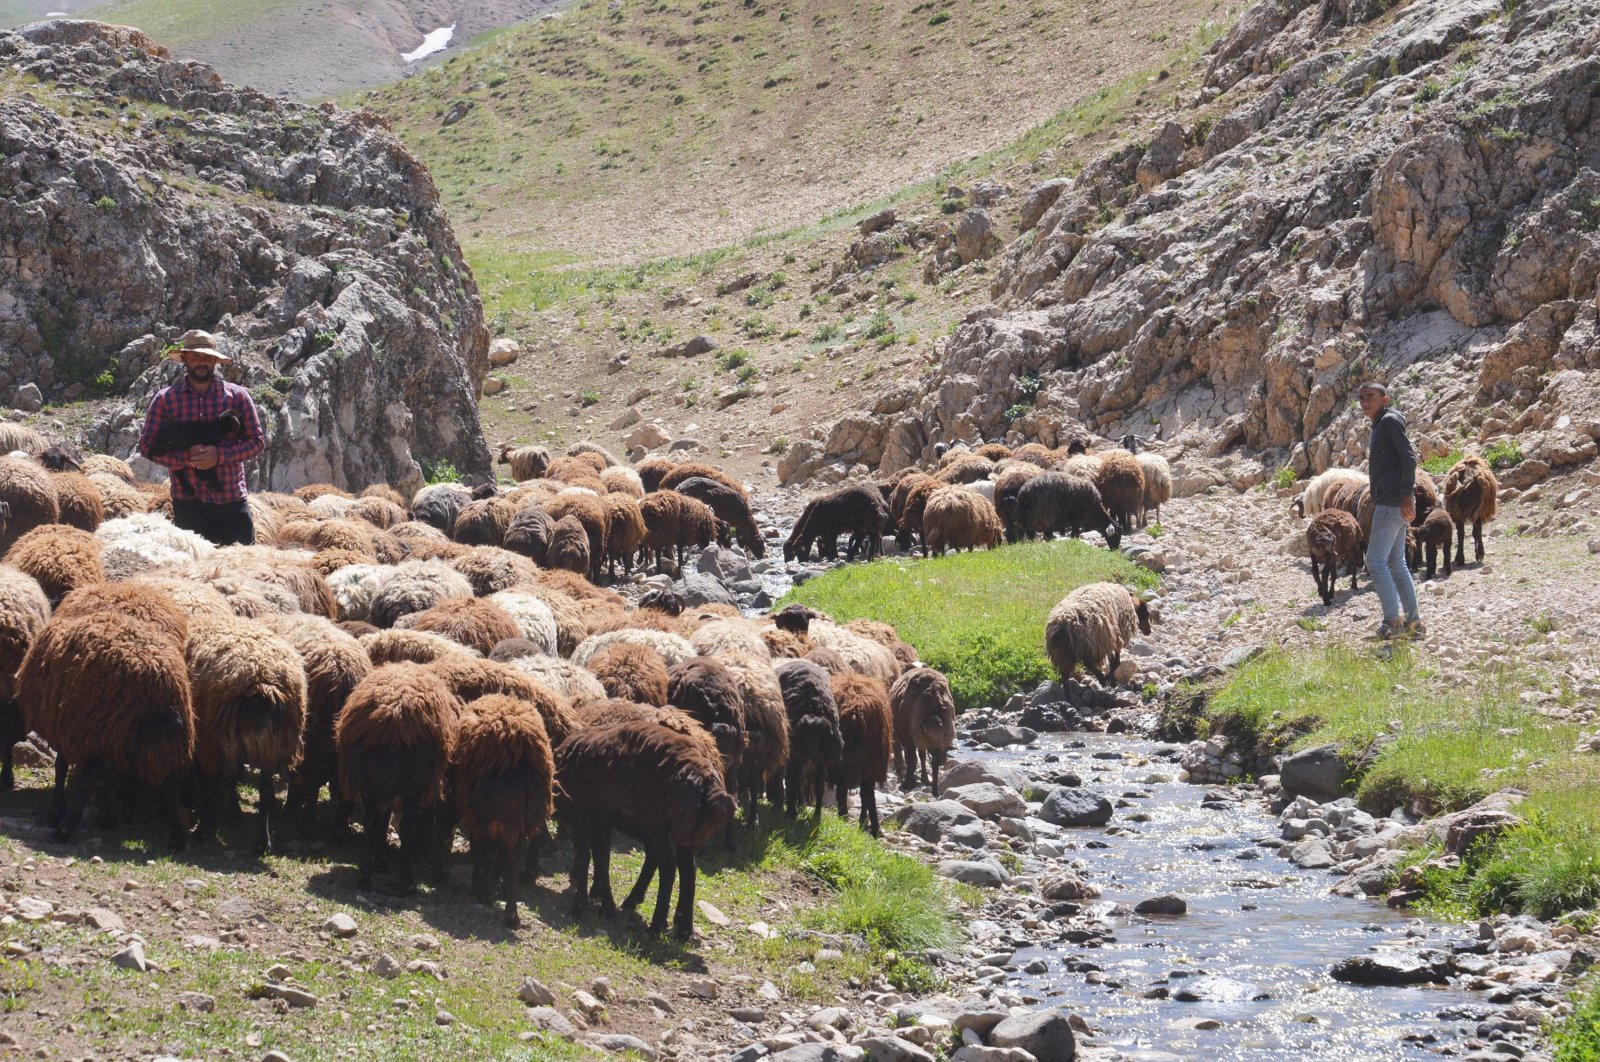 Türkiye now has over 47,359 shepherds certified by the Agriculture Ministry.